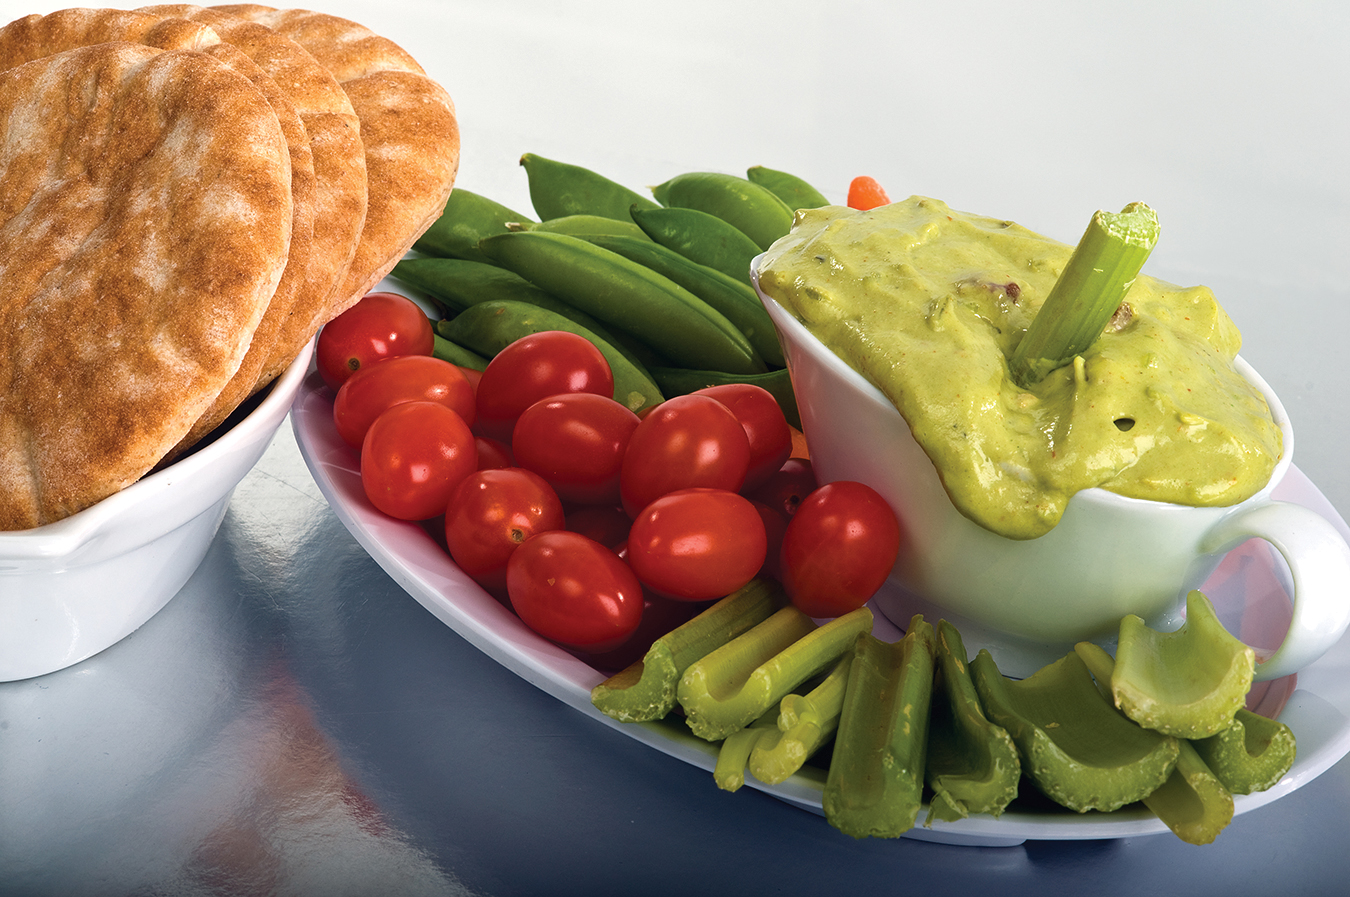 Healthy Snacks with the Dip on the Plate